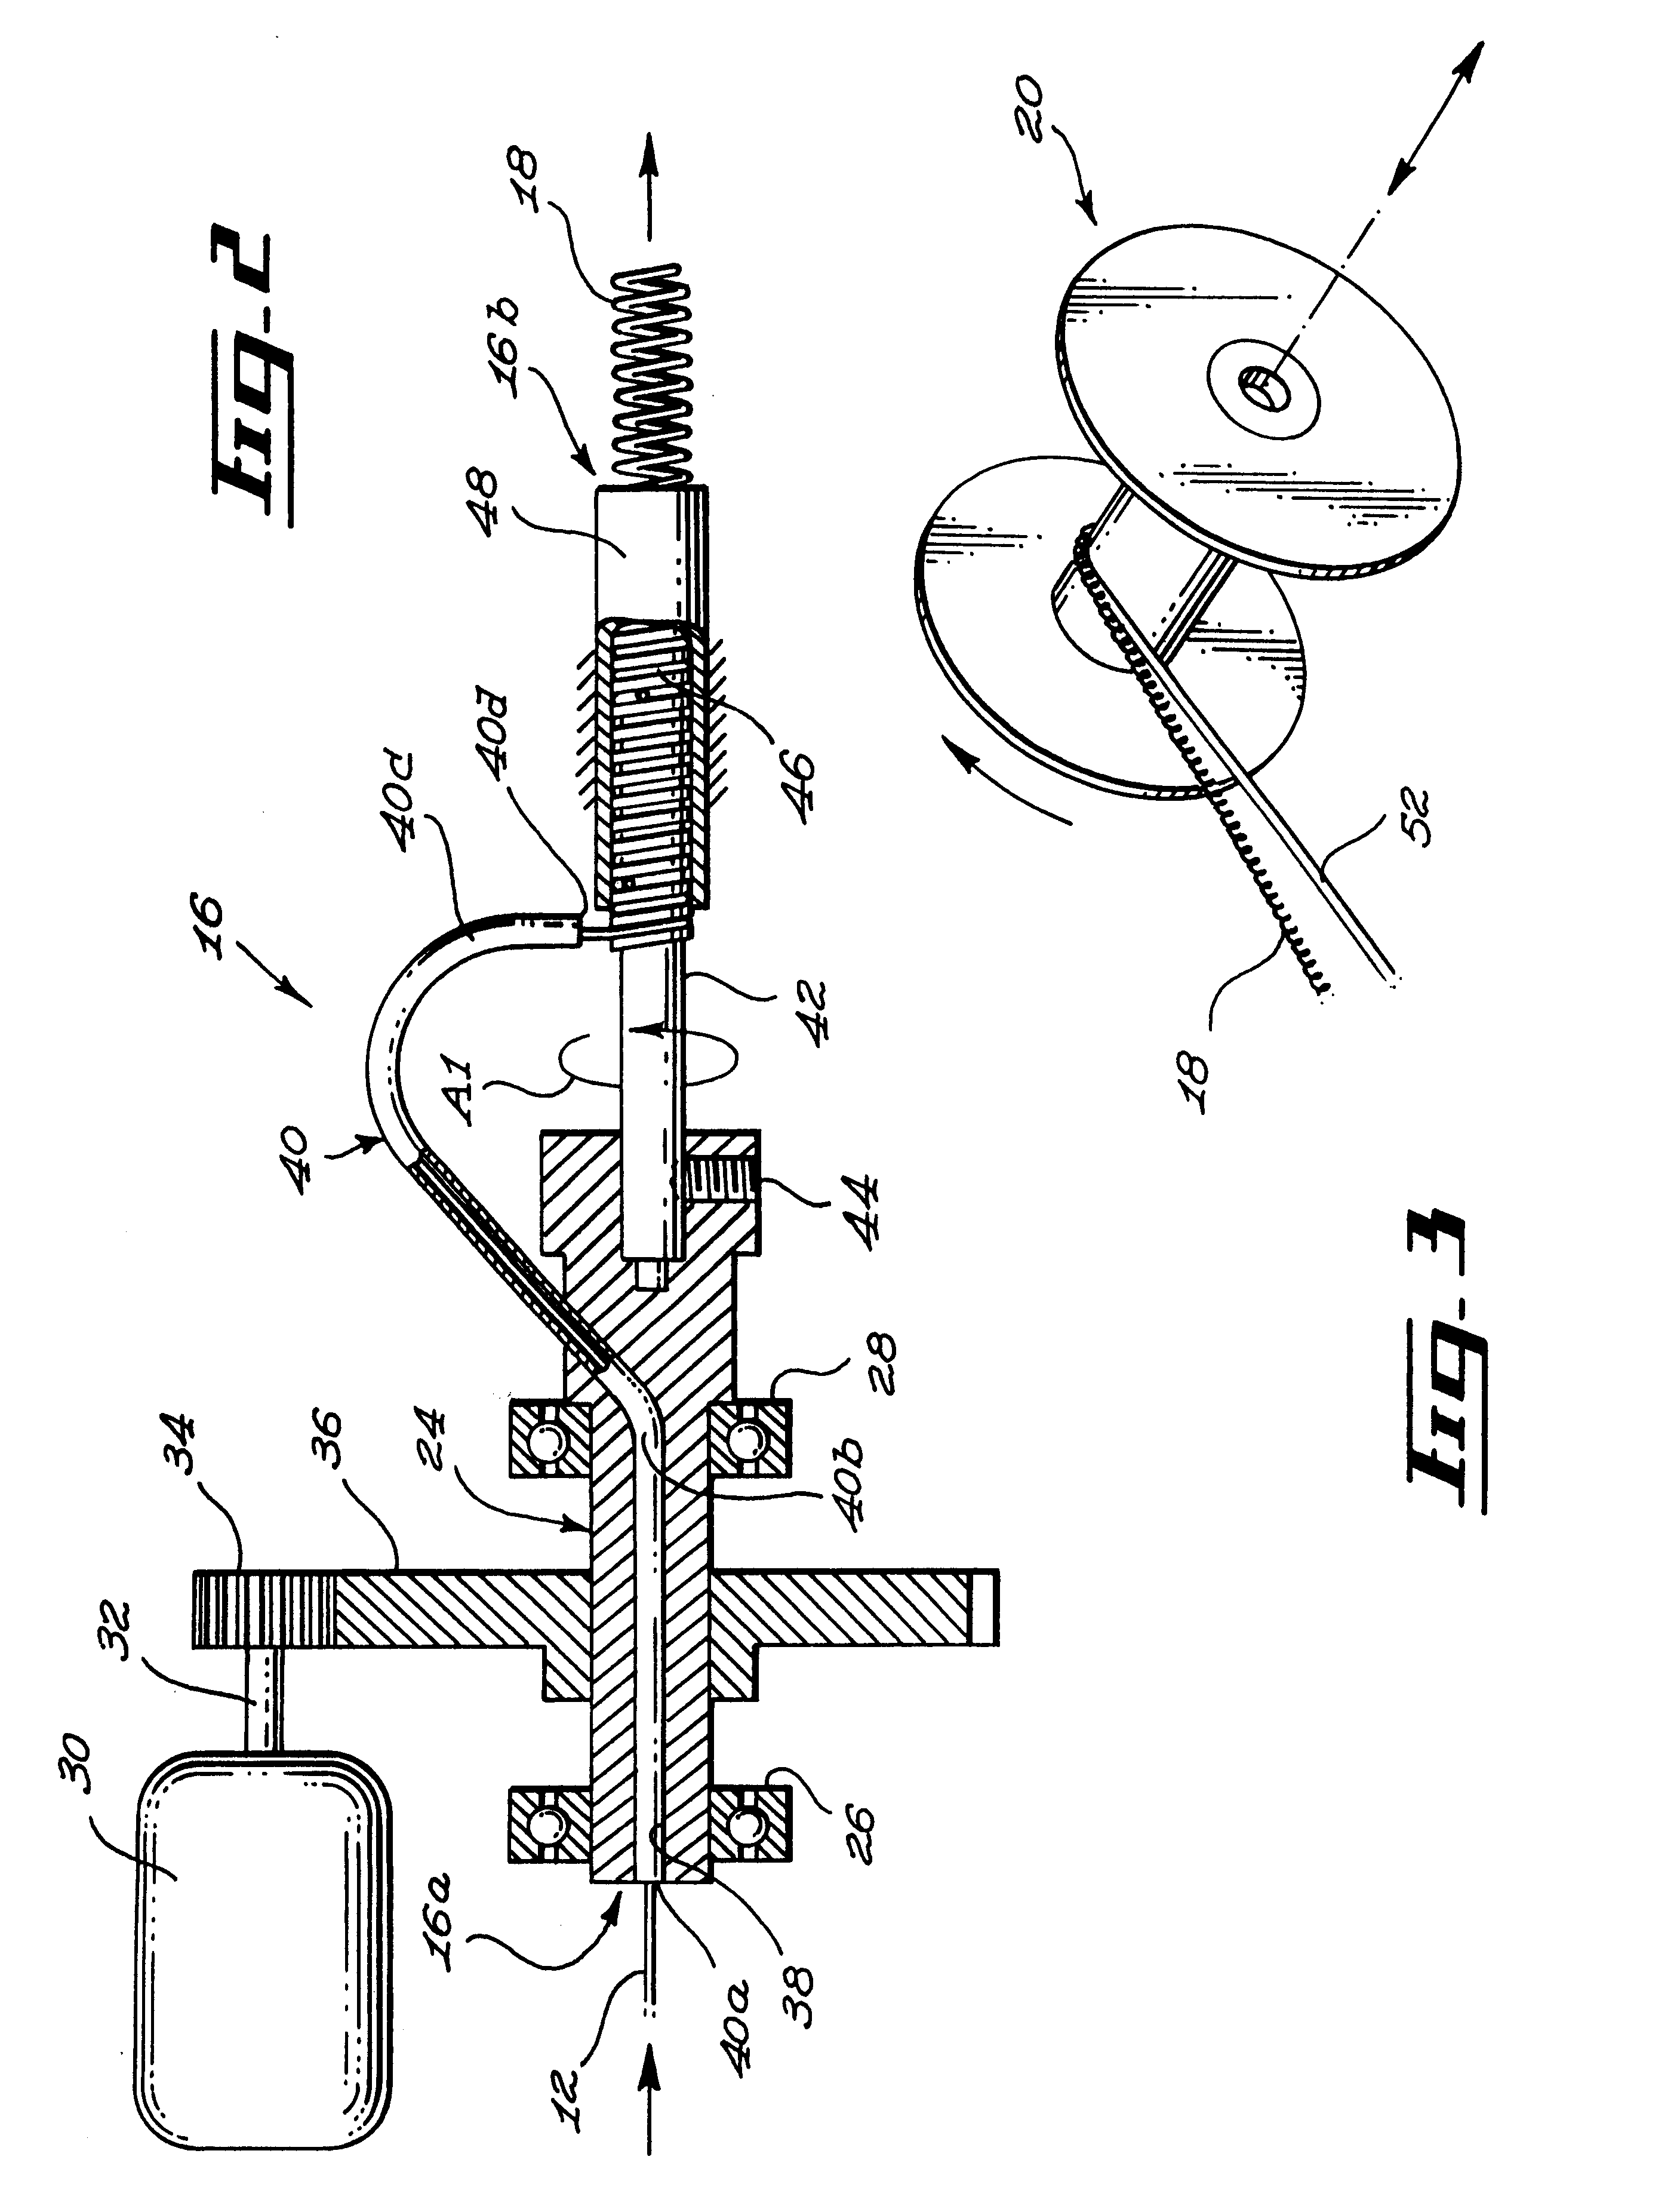 Method and apparatus for forming plastic coils